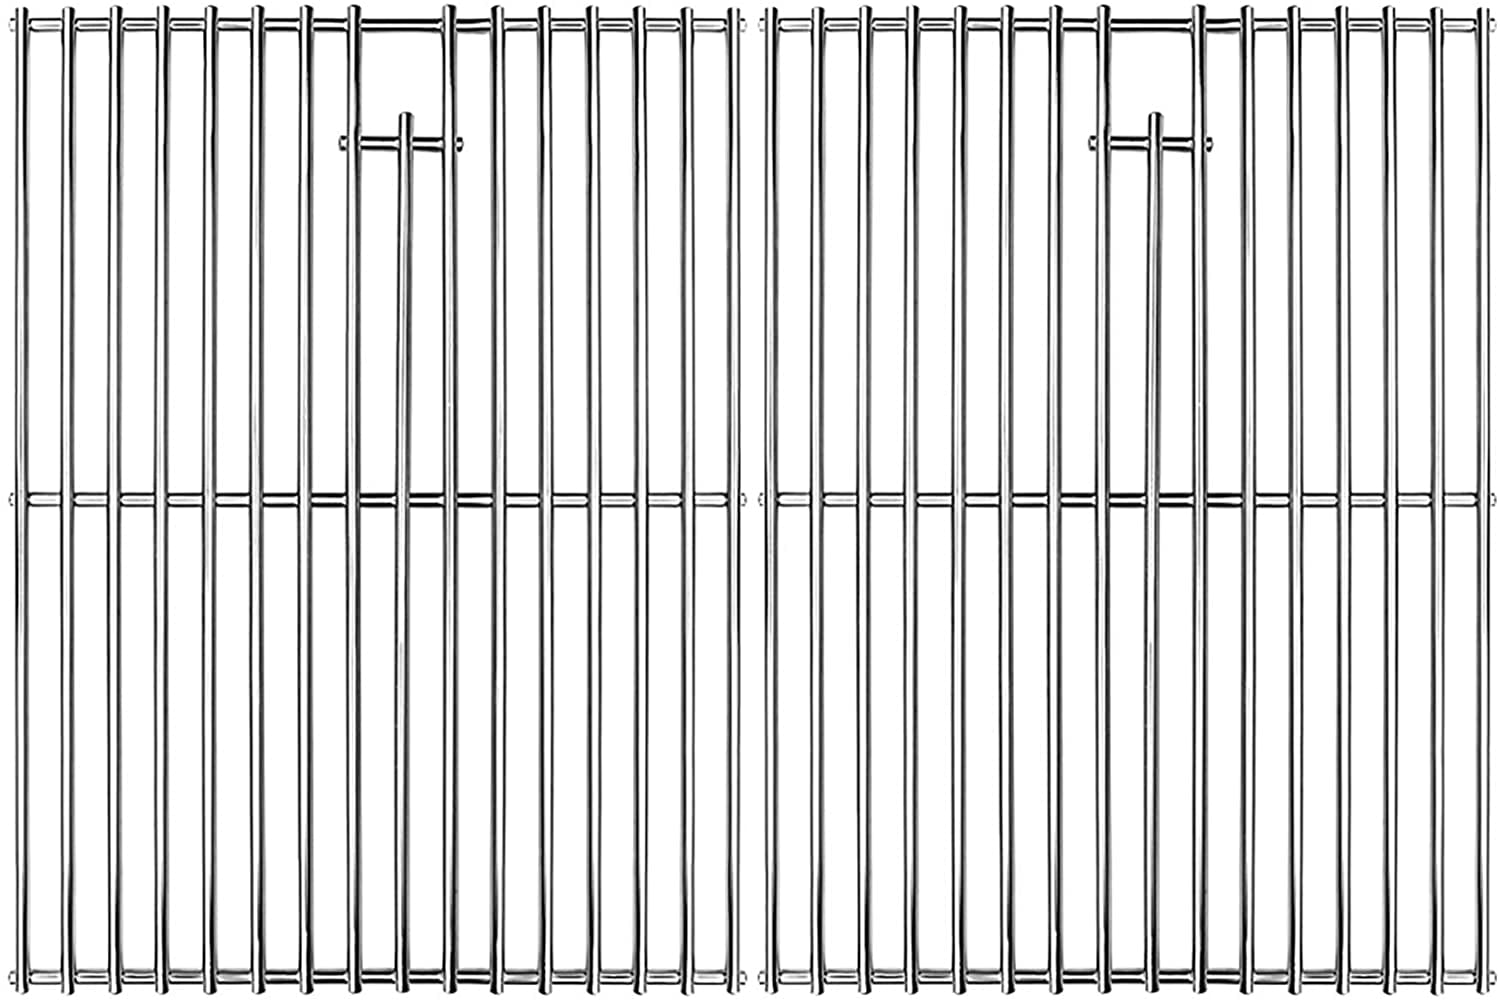 Kenmore 17 Uniflame Gas Grils Hisencn BBQ Grill Replacement Stainless Steel 17 inch Cooking grids 720-0830D 720-0888 Cooking grates Replacement Kit for Home Depot Nexgrill 720-0830H 720-0888n